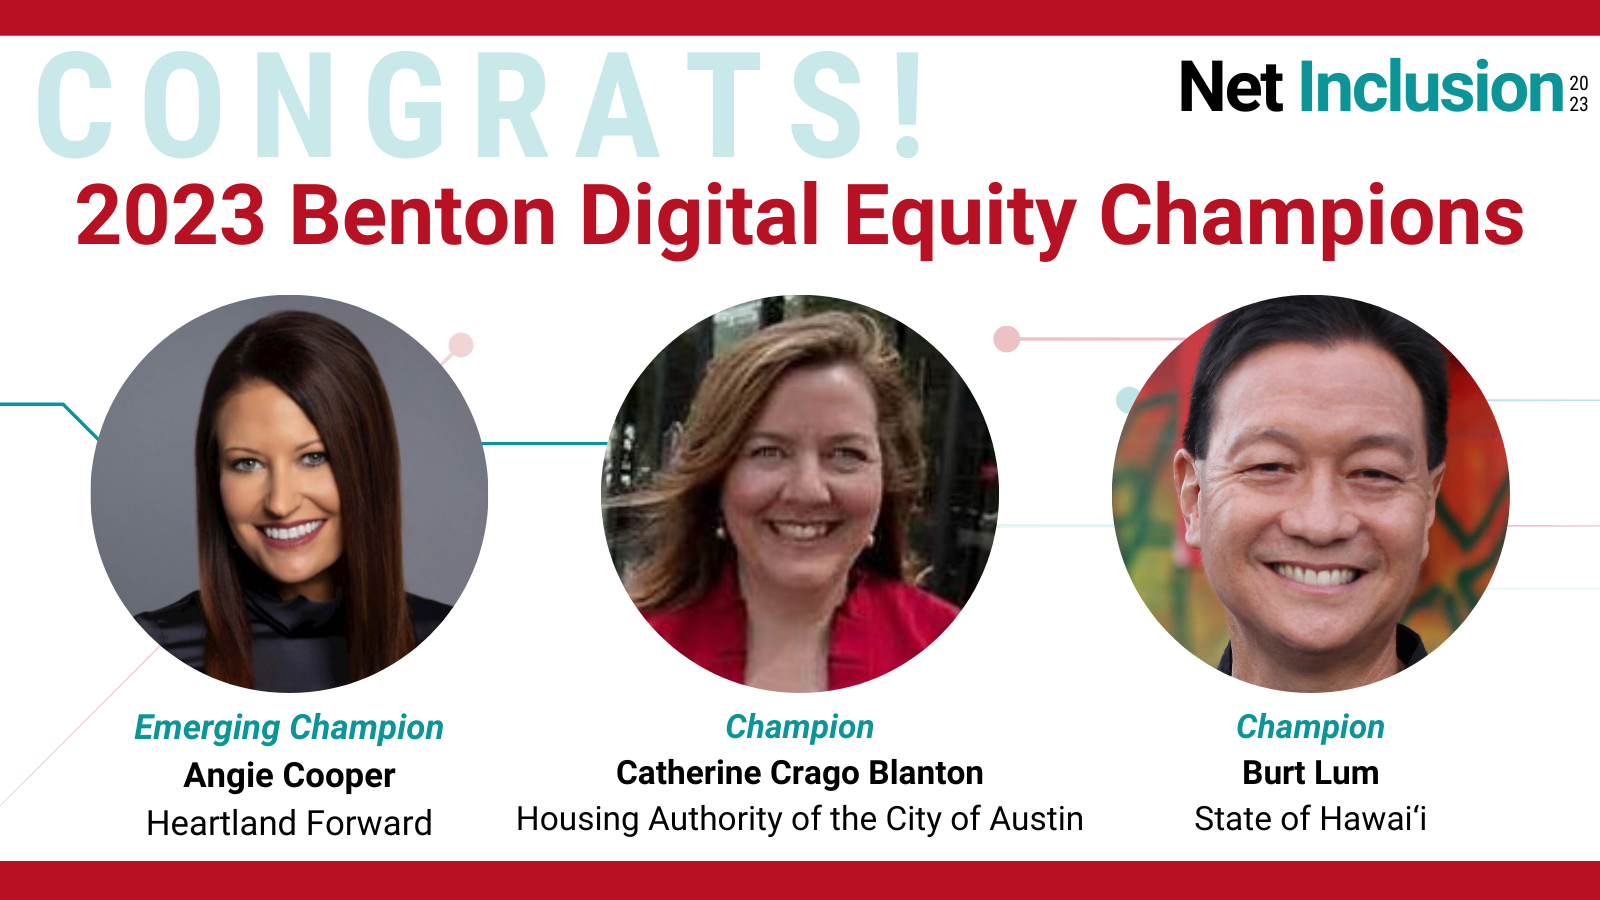 Graphic with Benton Digital Equity Champions and three headshots - 2 women and one man